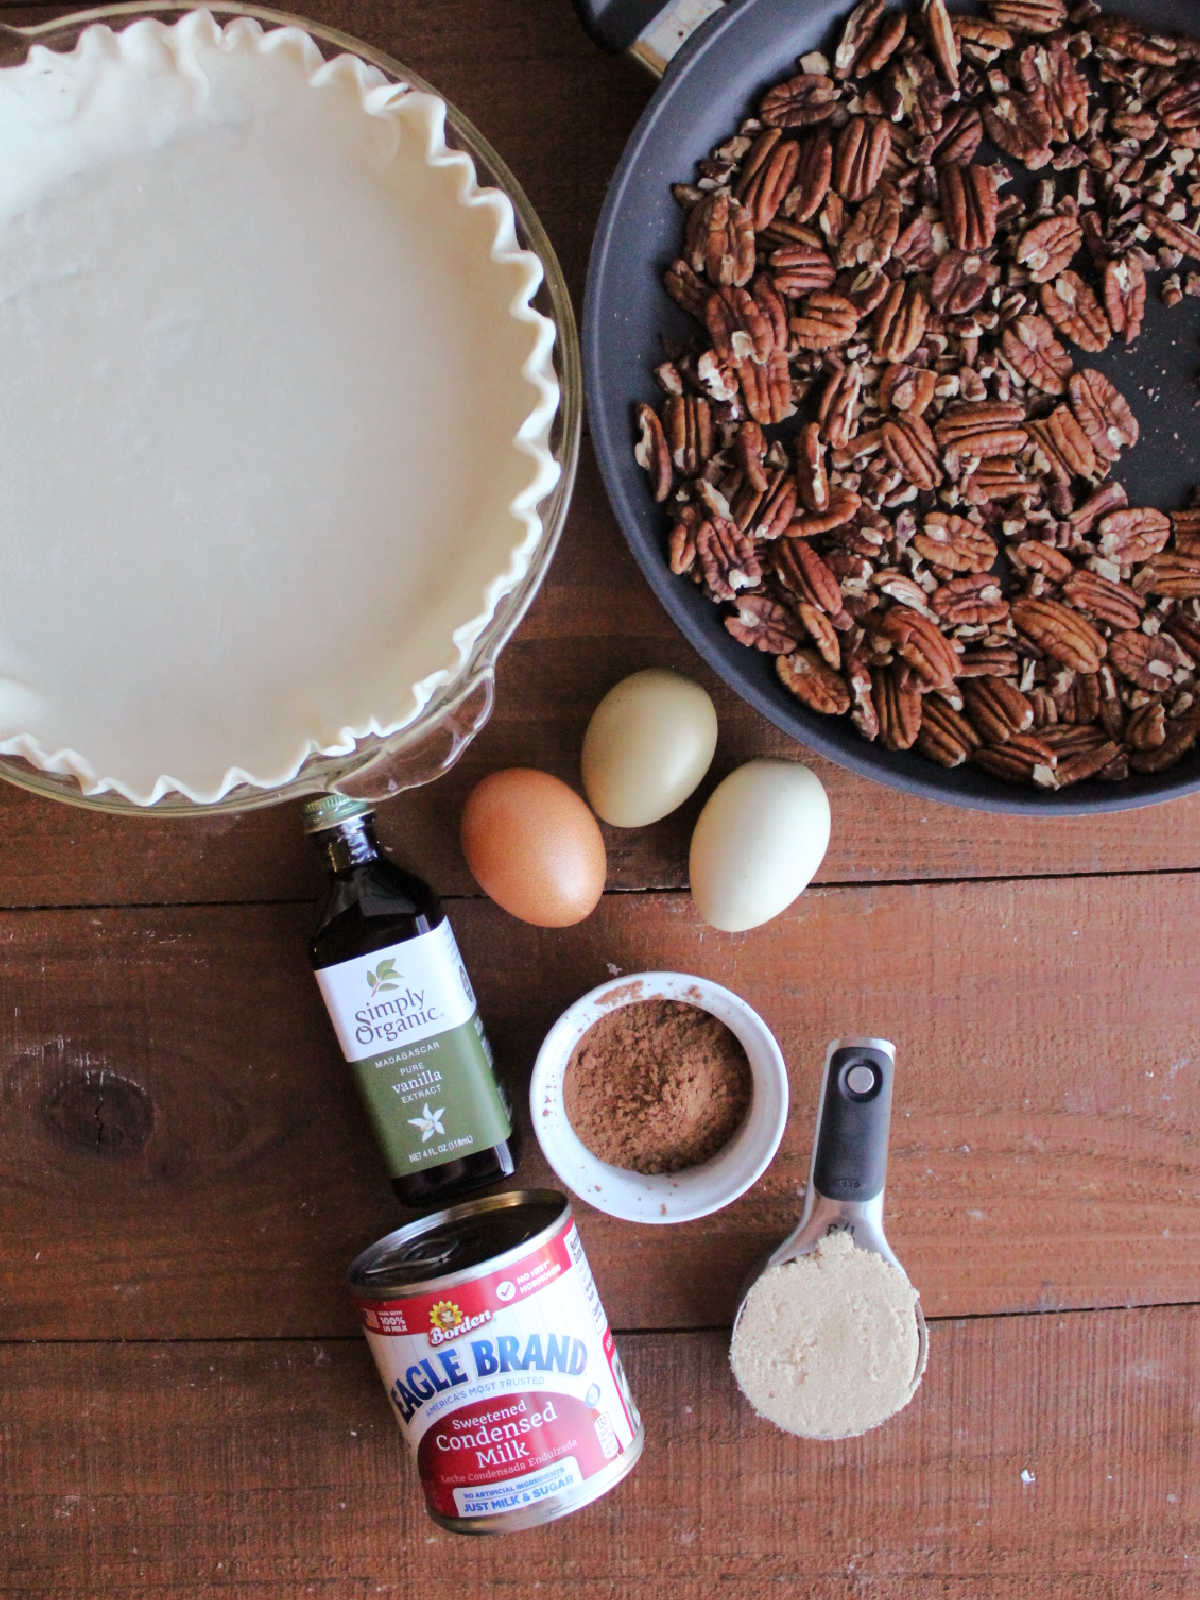 Ingredients including toasted pecans, pie crust, sweetened condensed milk, vanilla, cocoa powder, brown sugar and eggs, ready to be made into chocolate pecan pie.